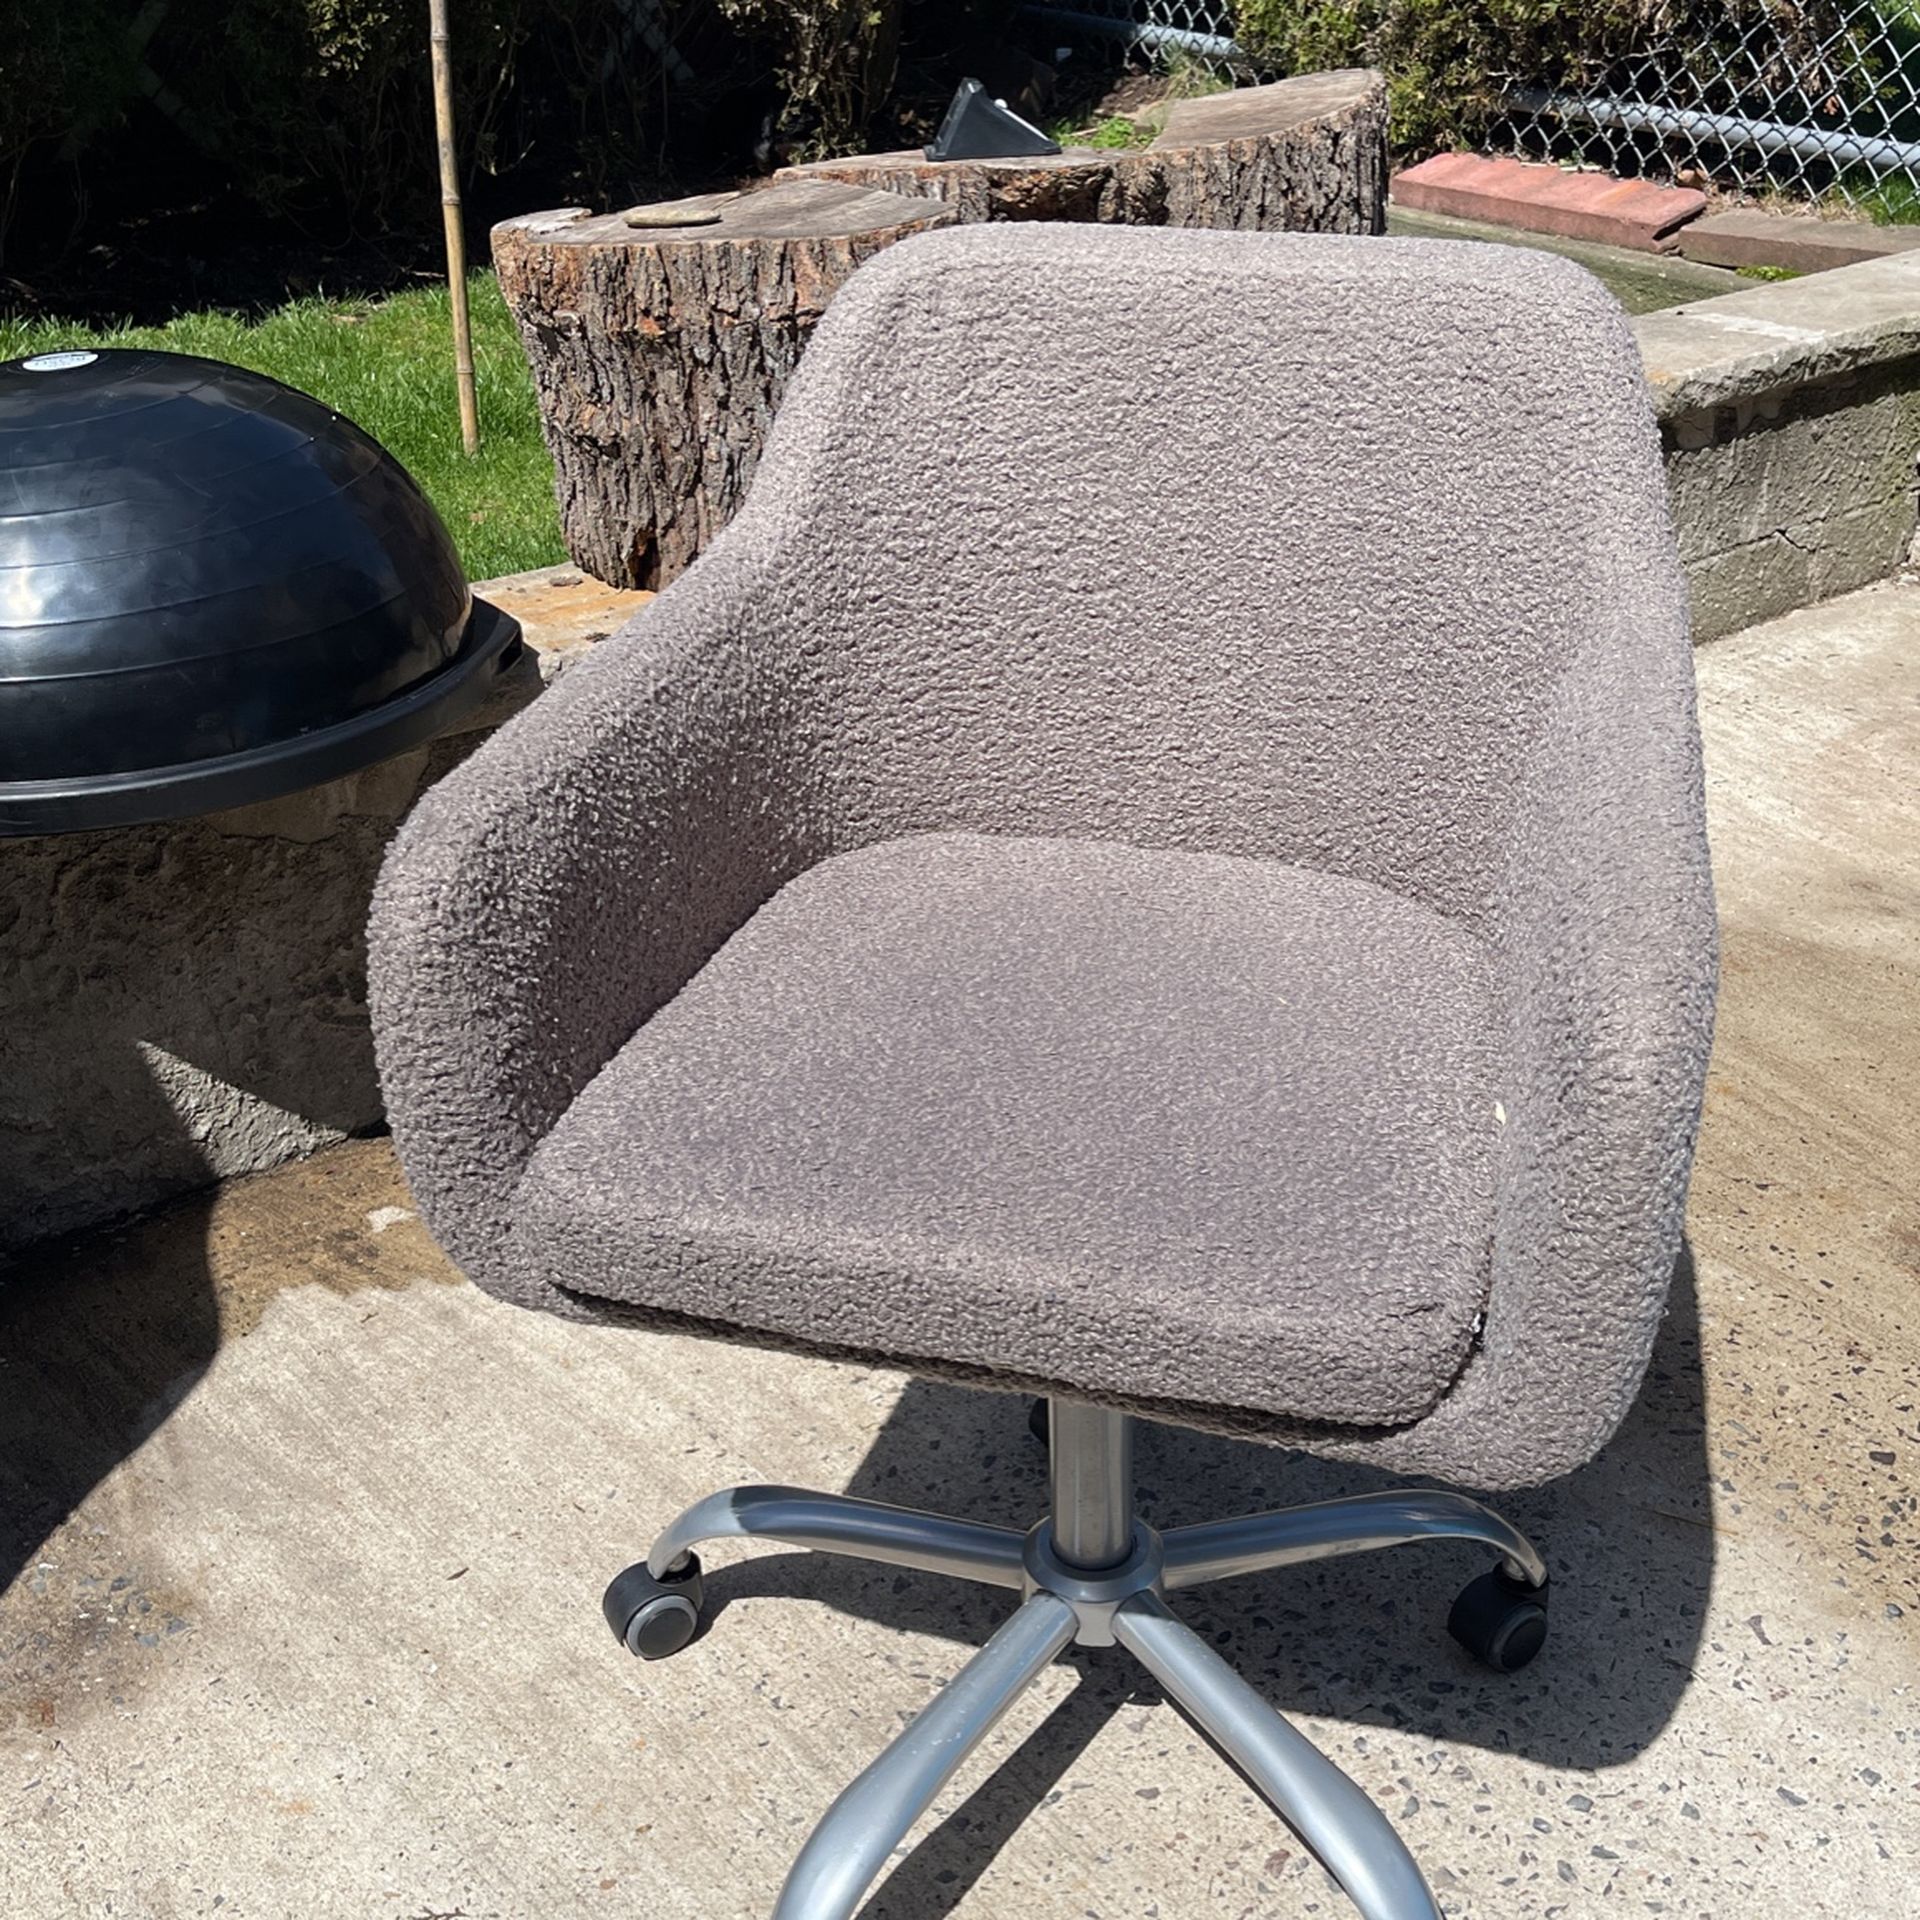 5/17/22 Office Rolling Chair $10.00